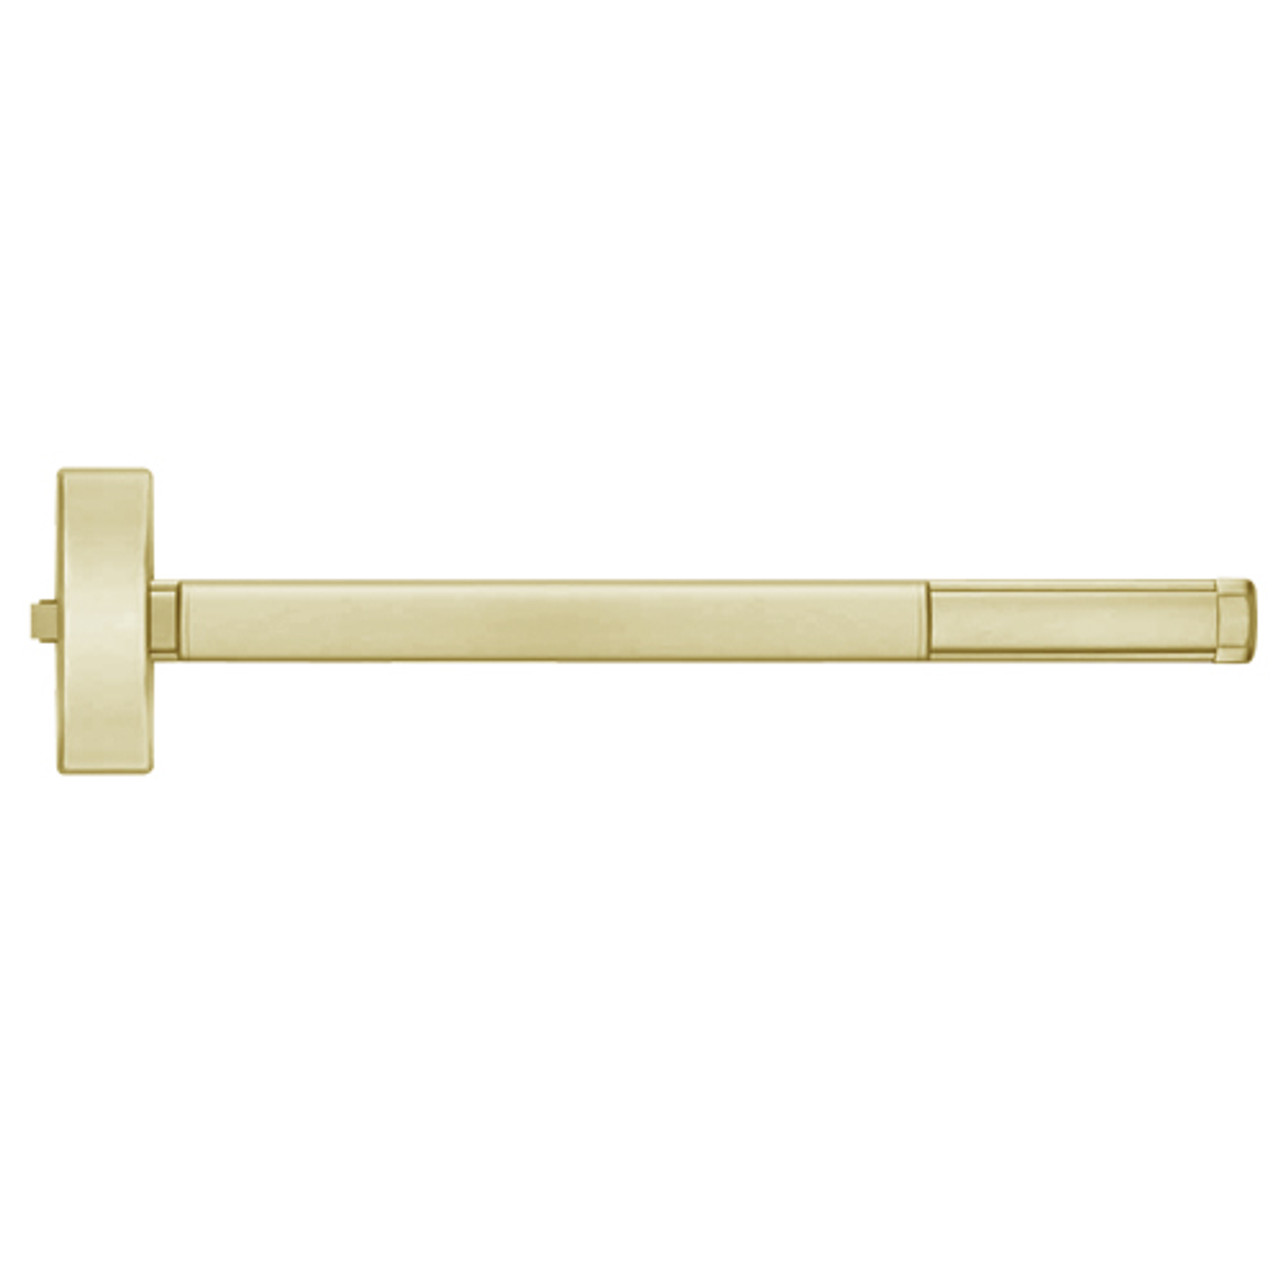 TSFL2105-606-36 PHI 2100 Series Fire Rated Apex Rim Exit Device with Touchbar Monitoring Switch Prepped for Key Controls Thumb Piece in Satin Brass Finish